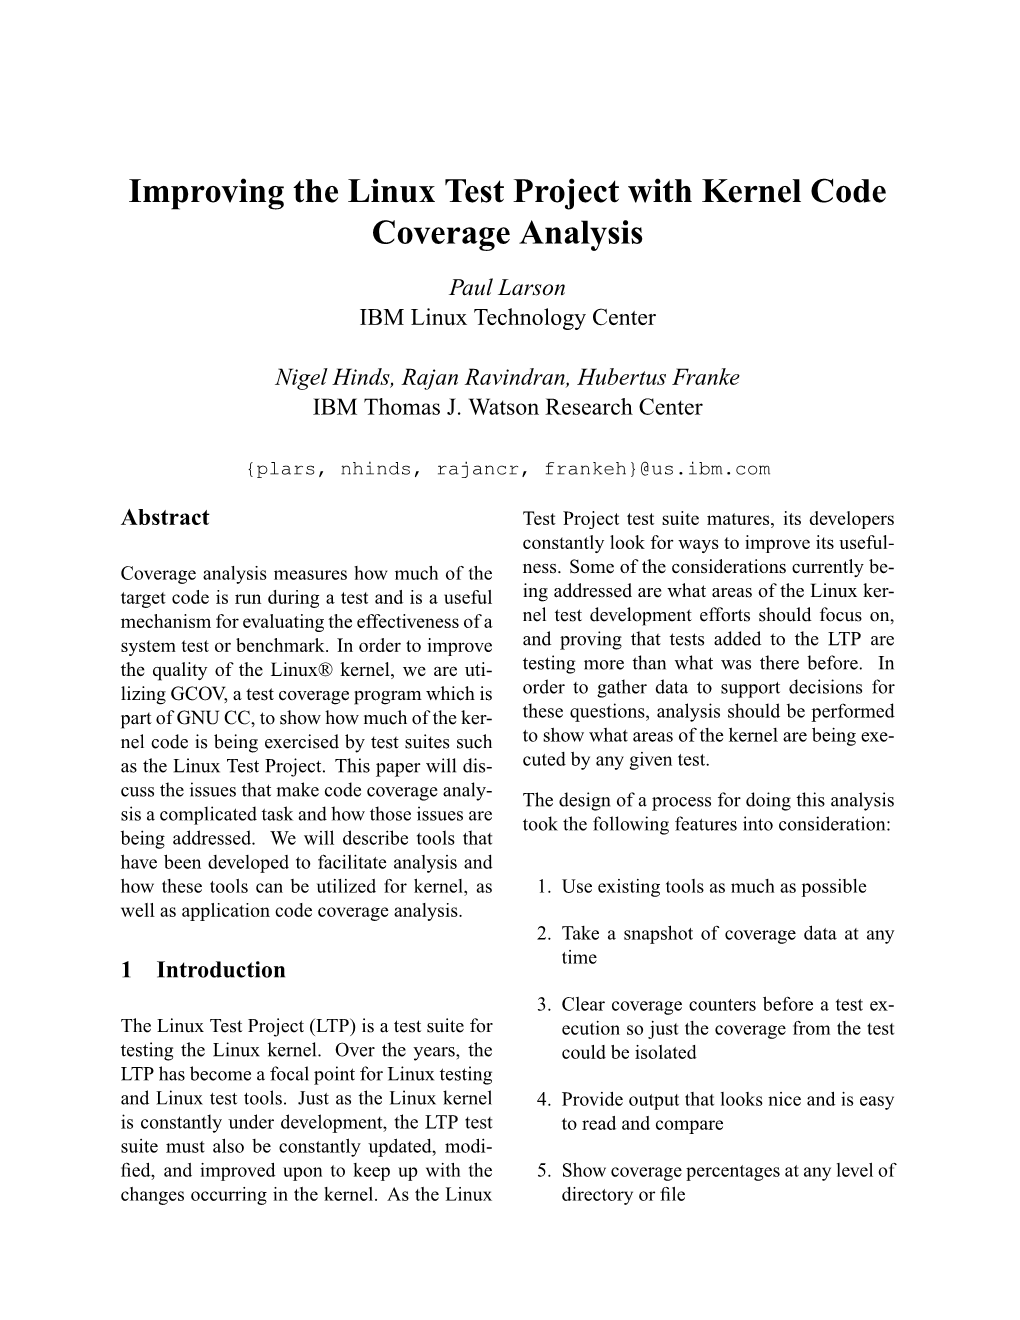 Improving the Linux Test Project with Kernel Code Coverage Analysis